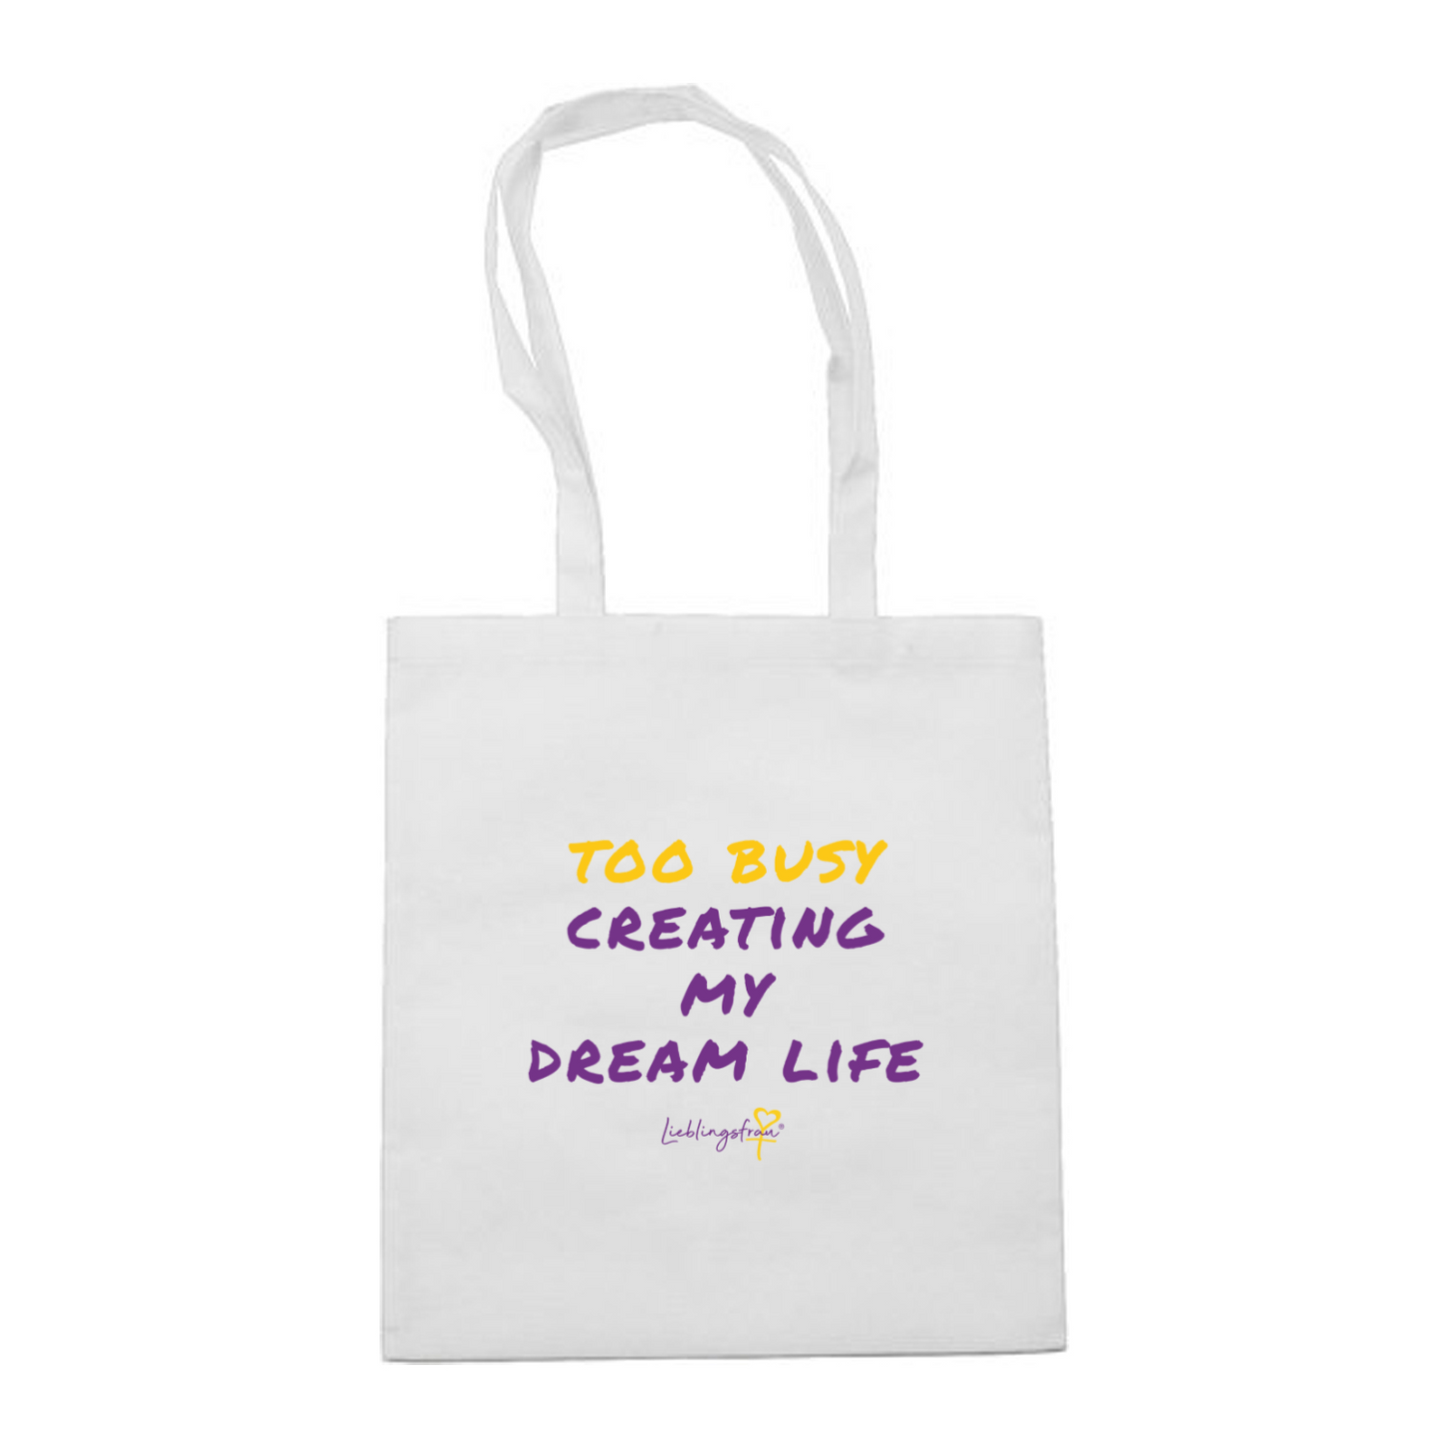 Too busy creating my dream life TASCHE